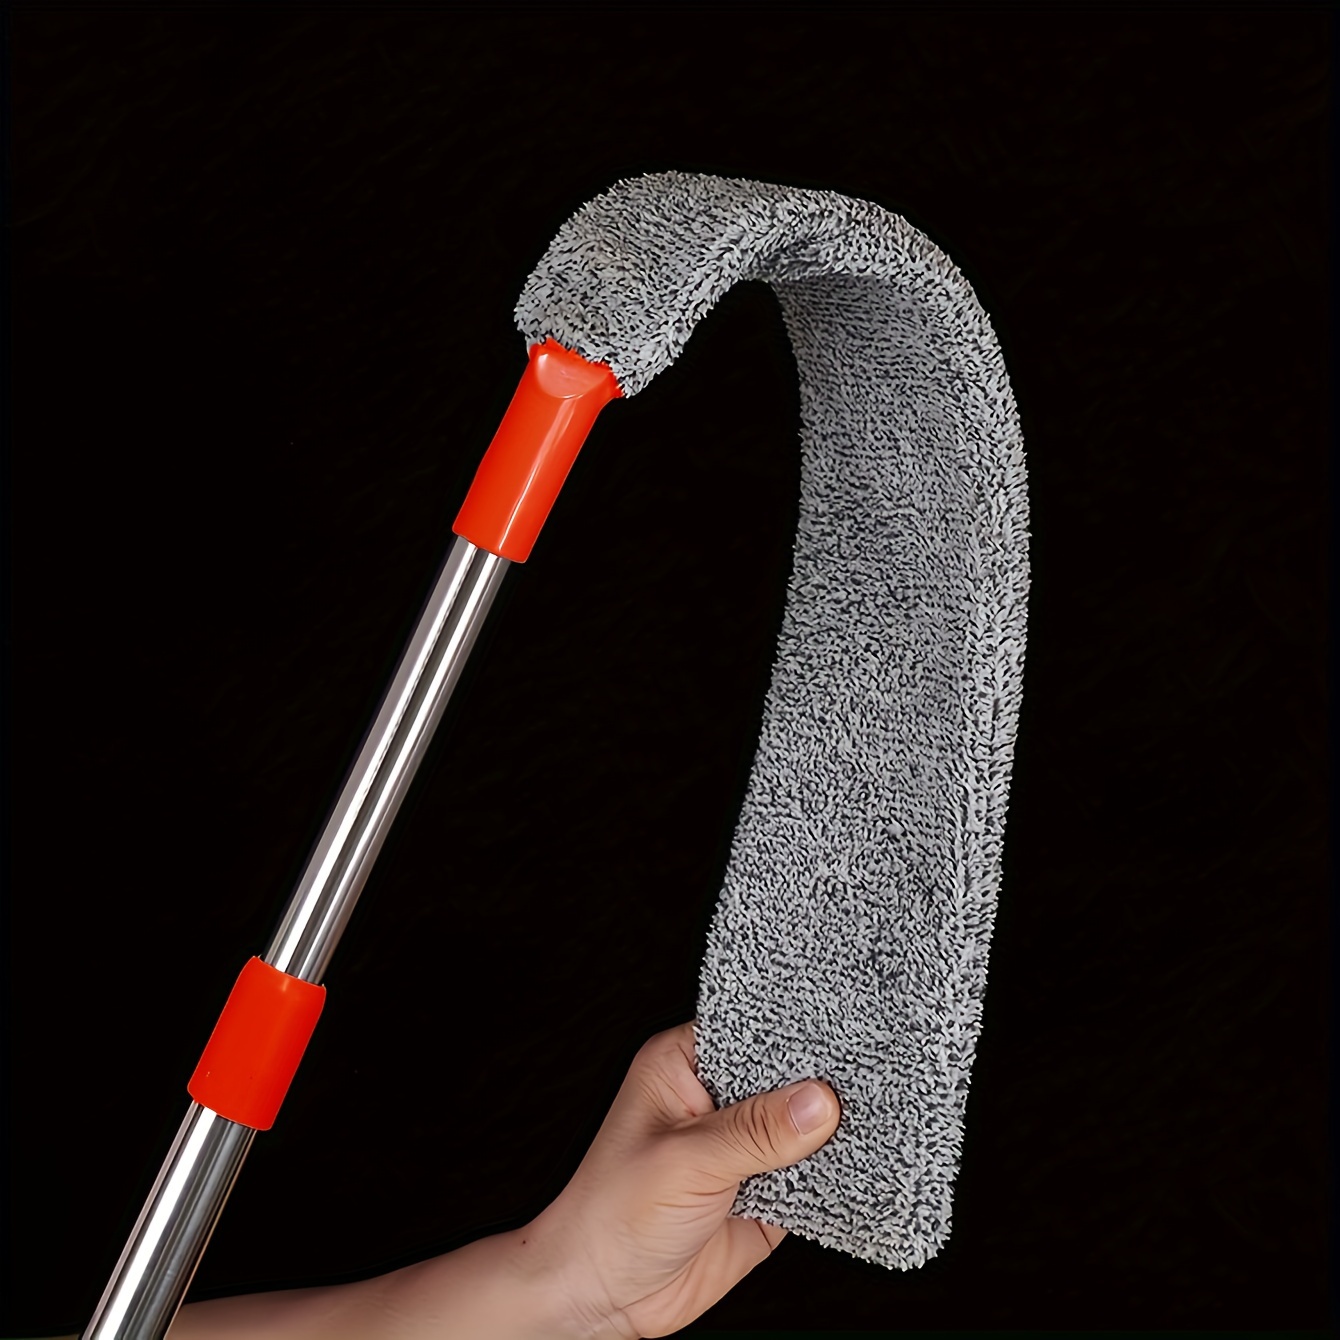 

Extendable Microfiber Duster With Long Handle - Washable, Retractable Cleaning Brush For Under Appliances, Furniture & Couch